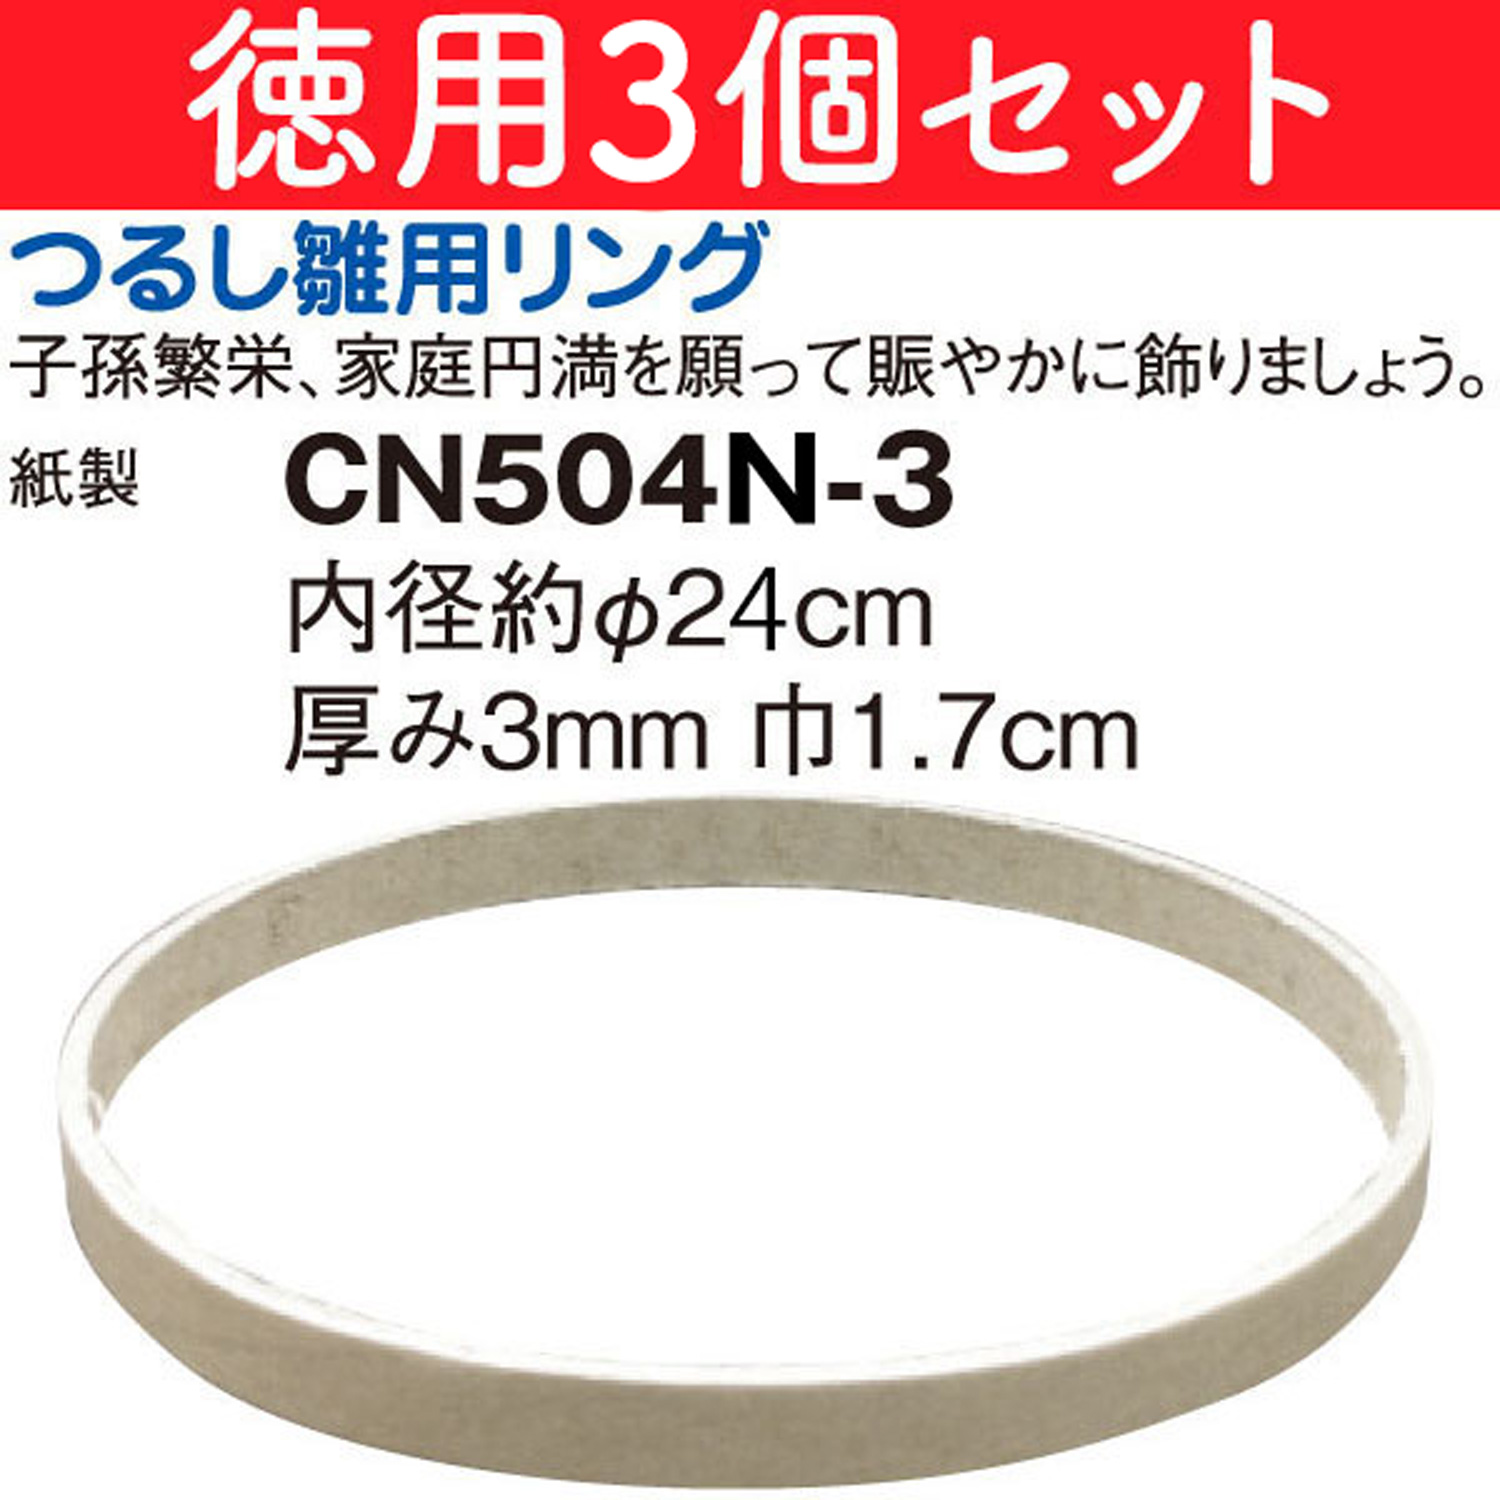 CN504N-3 Special) Decorative Rings 3pcs Value Pack (pack)